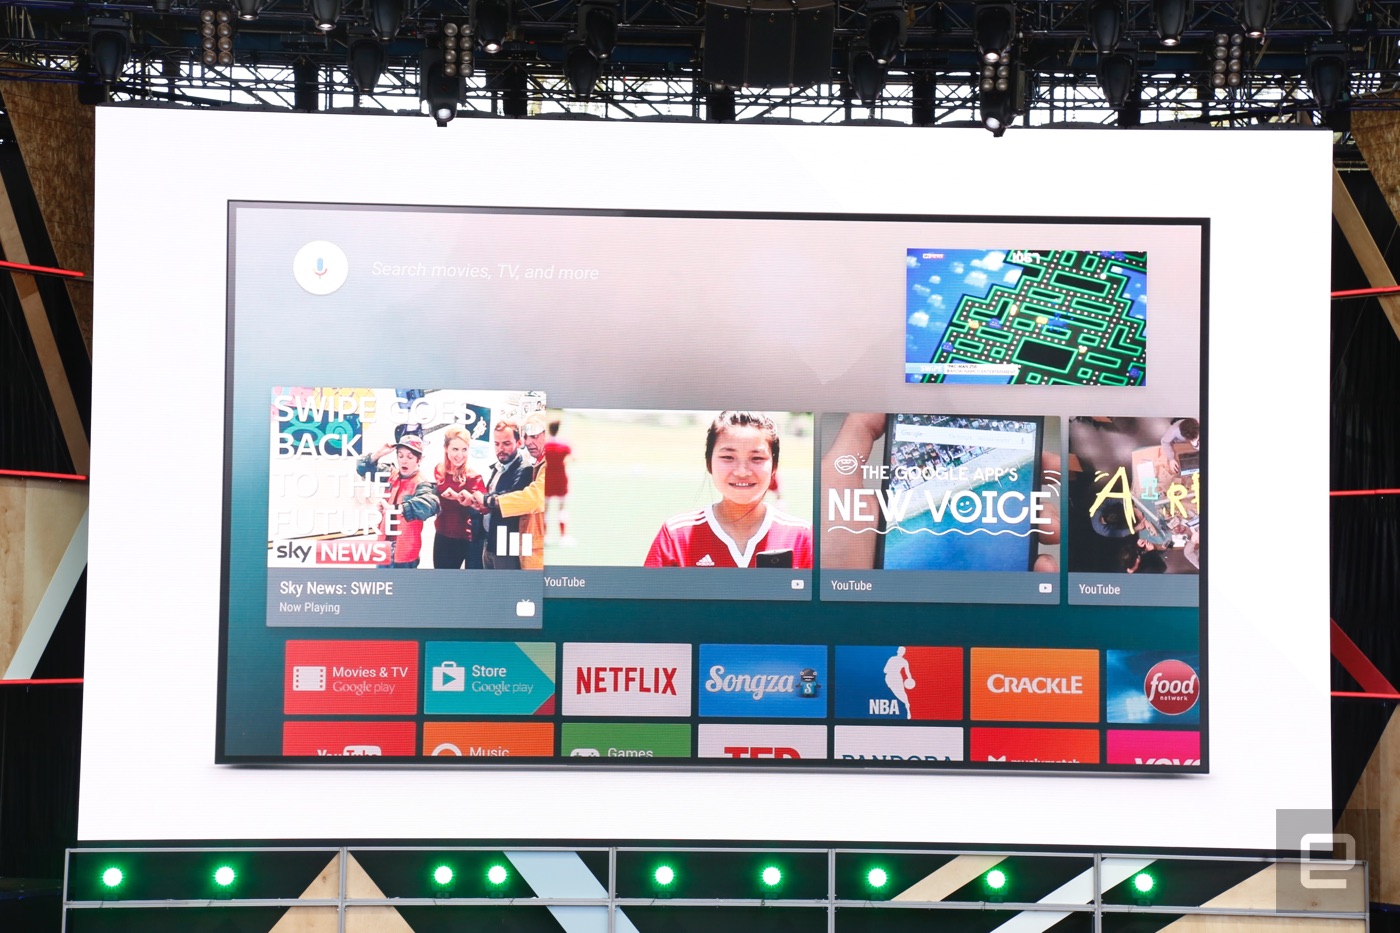 Google Cast and Android TV are coming to even more screens